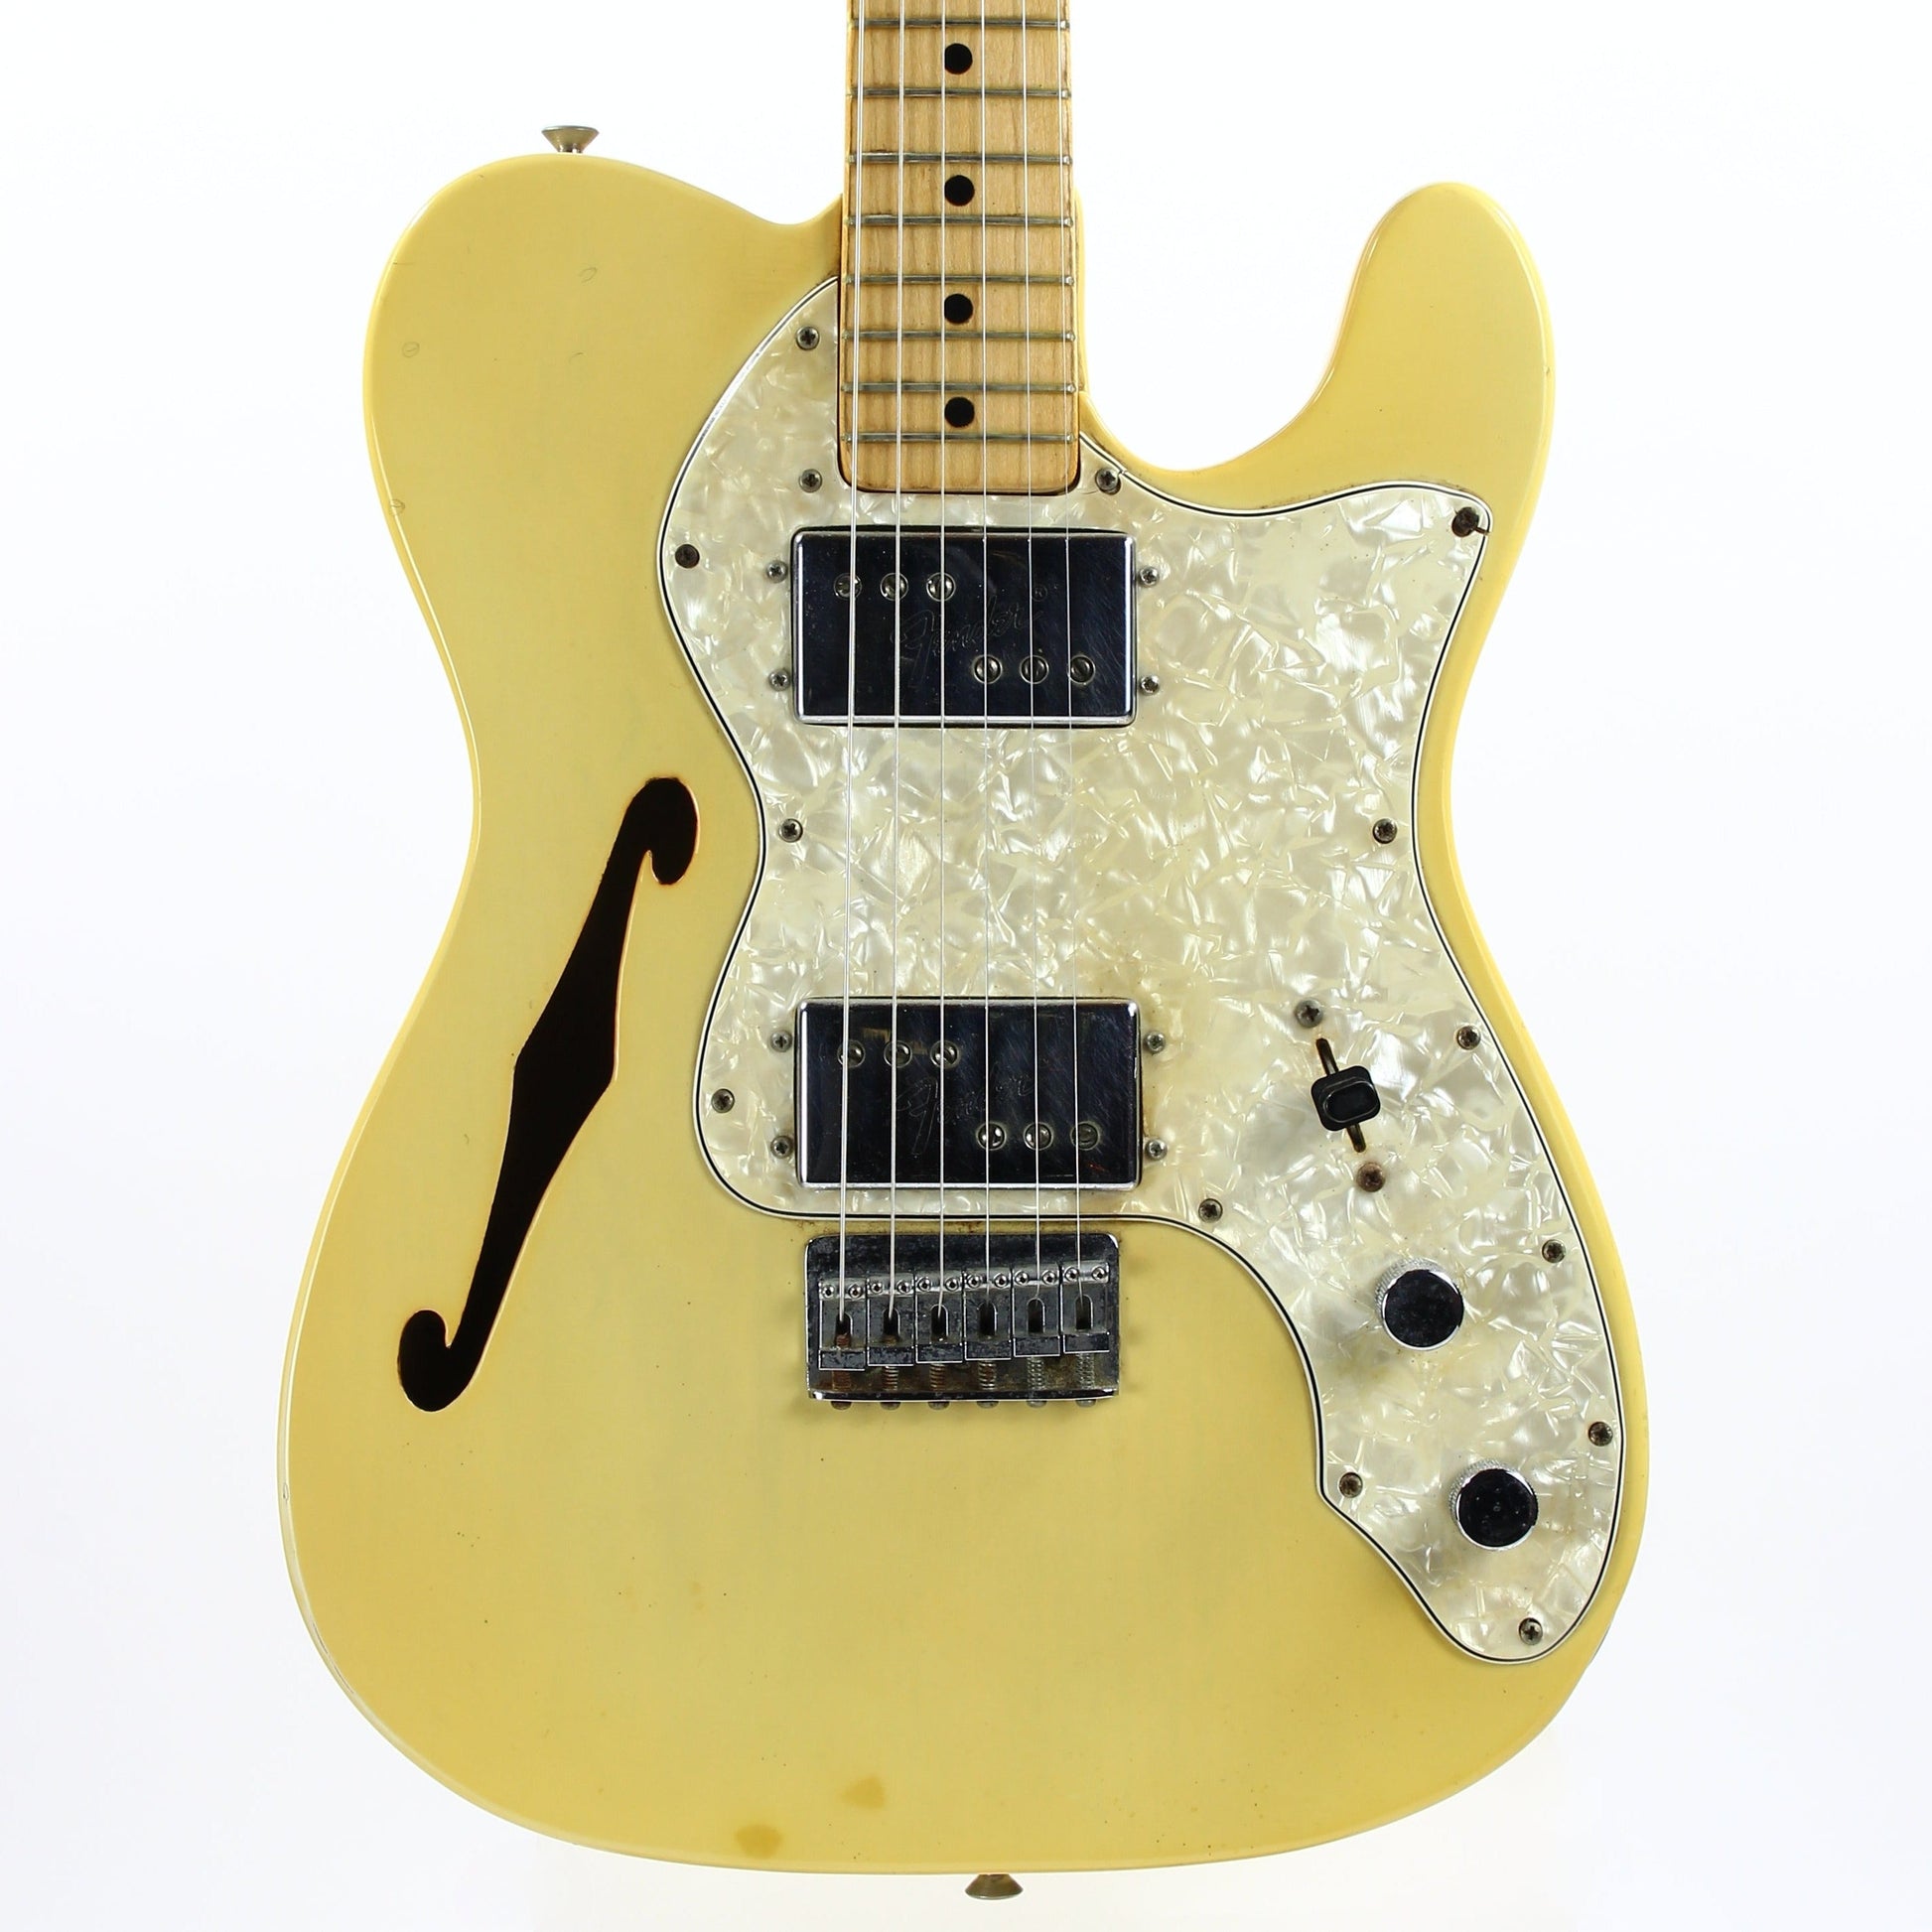 1970's Fender Telecaster Thinline with Seth Lover humbuckers in blonde